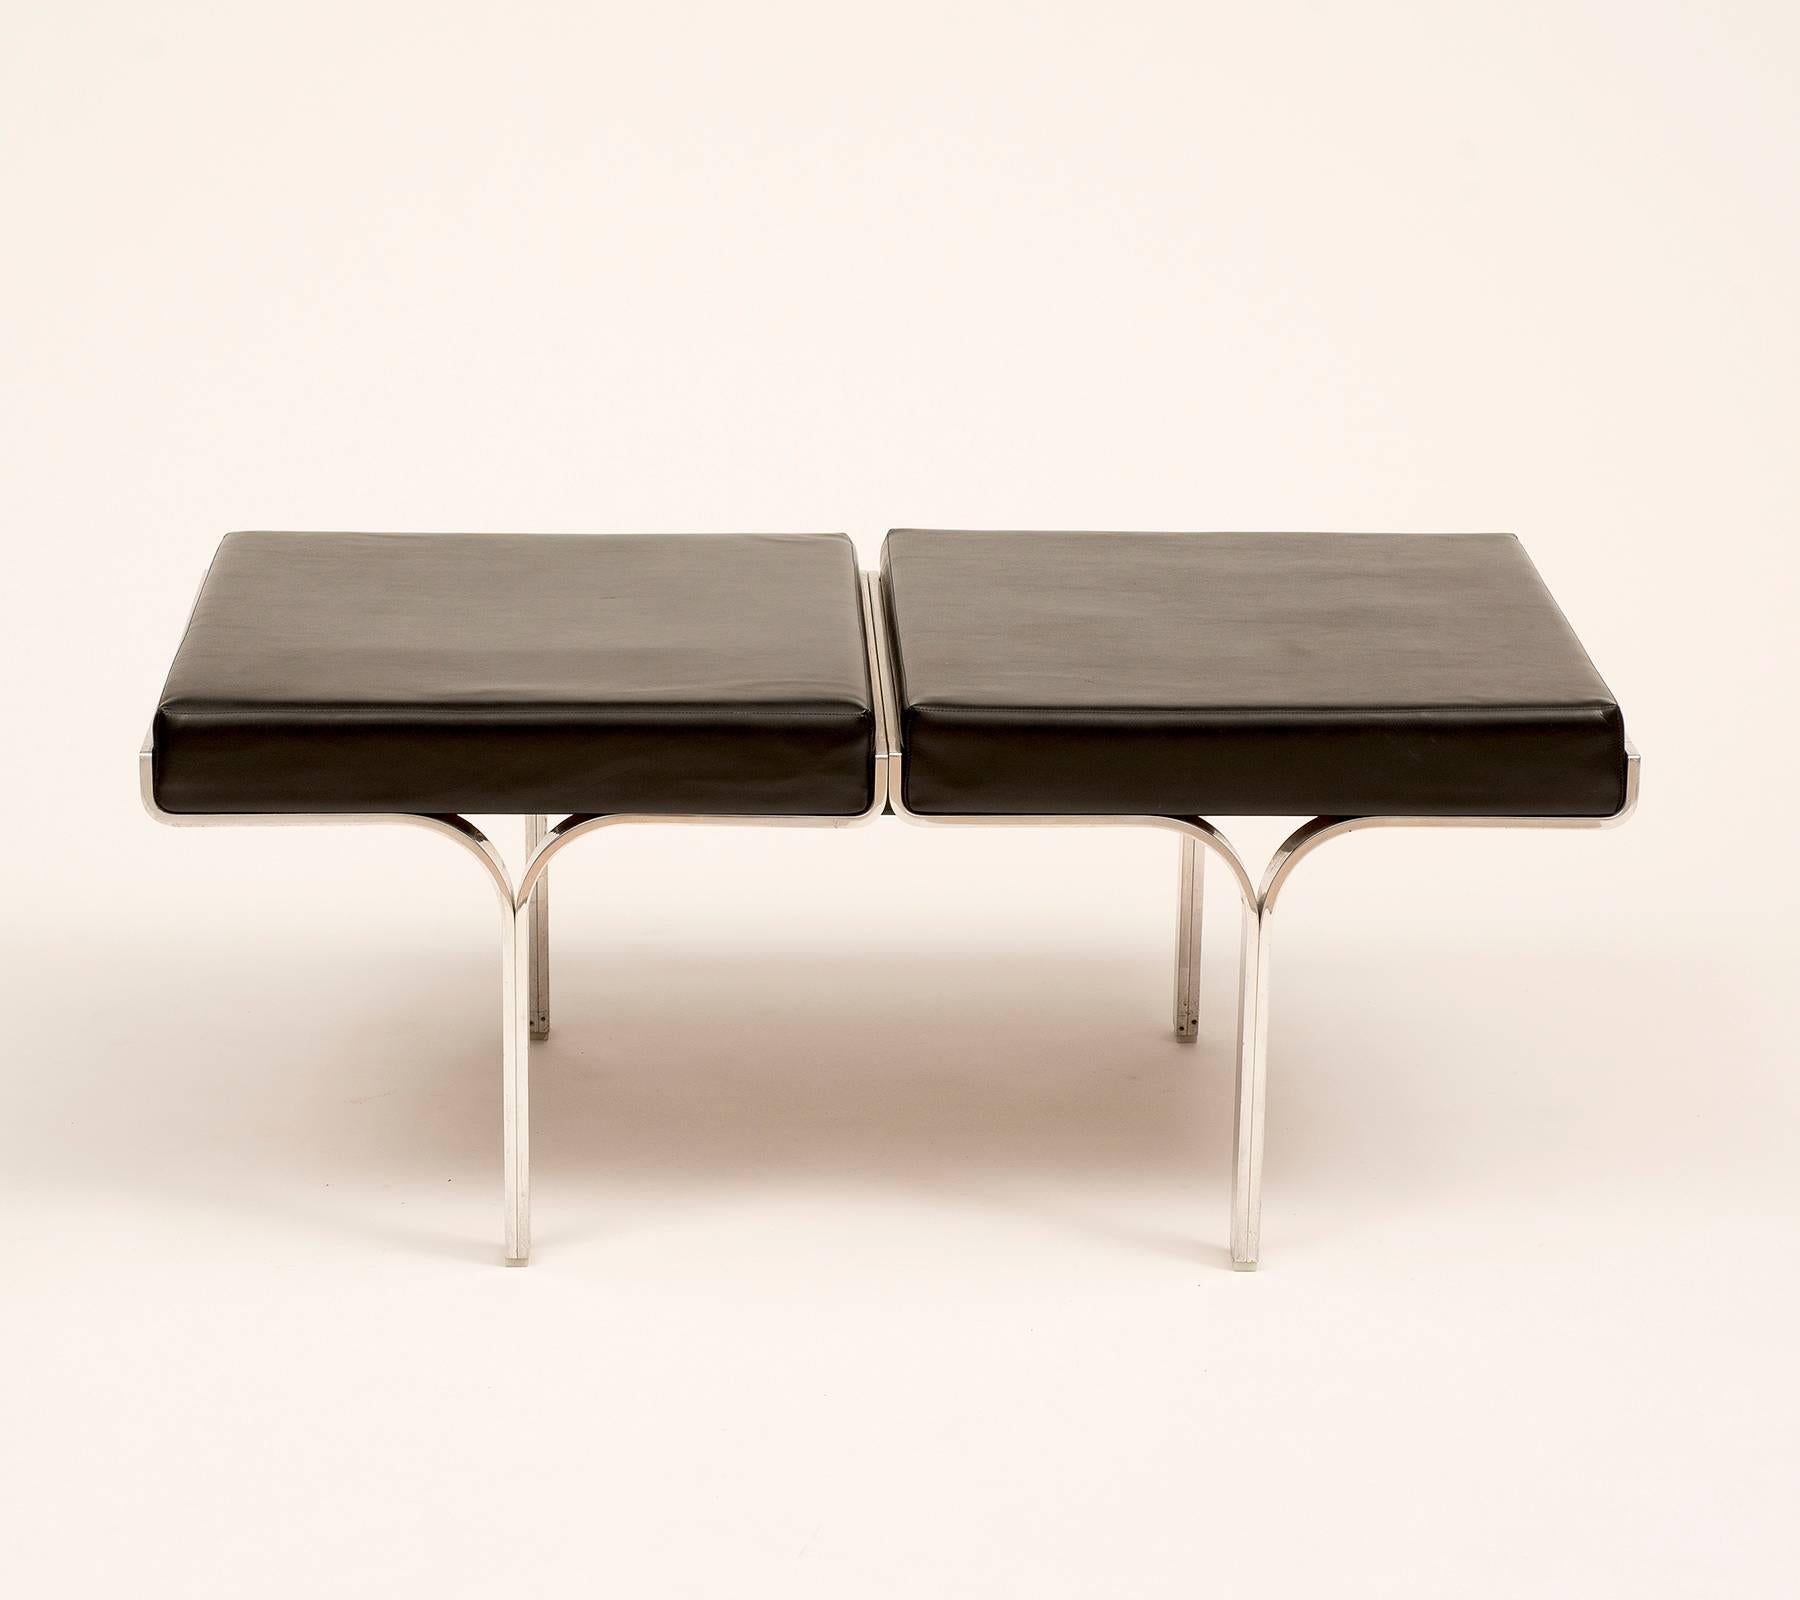 The link bench by John Behringer, for J & G, is in cast aluminum and the original black leatherette, 1960s. Triple link version is in the permanent collect of the MOMA.